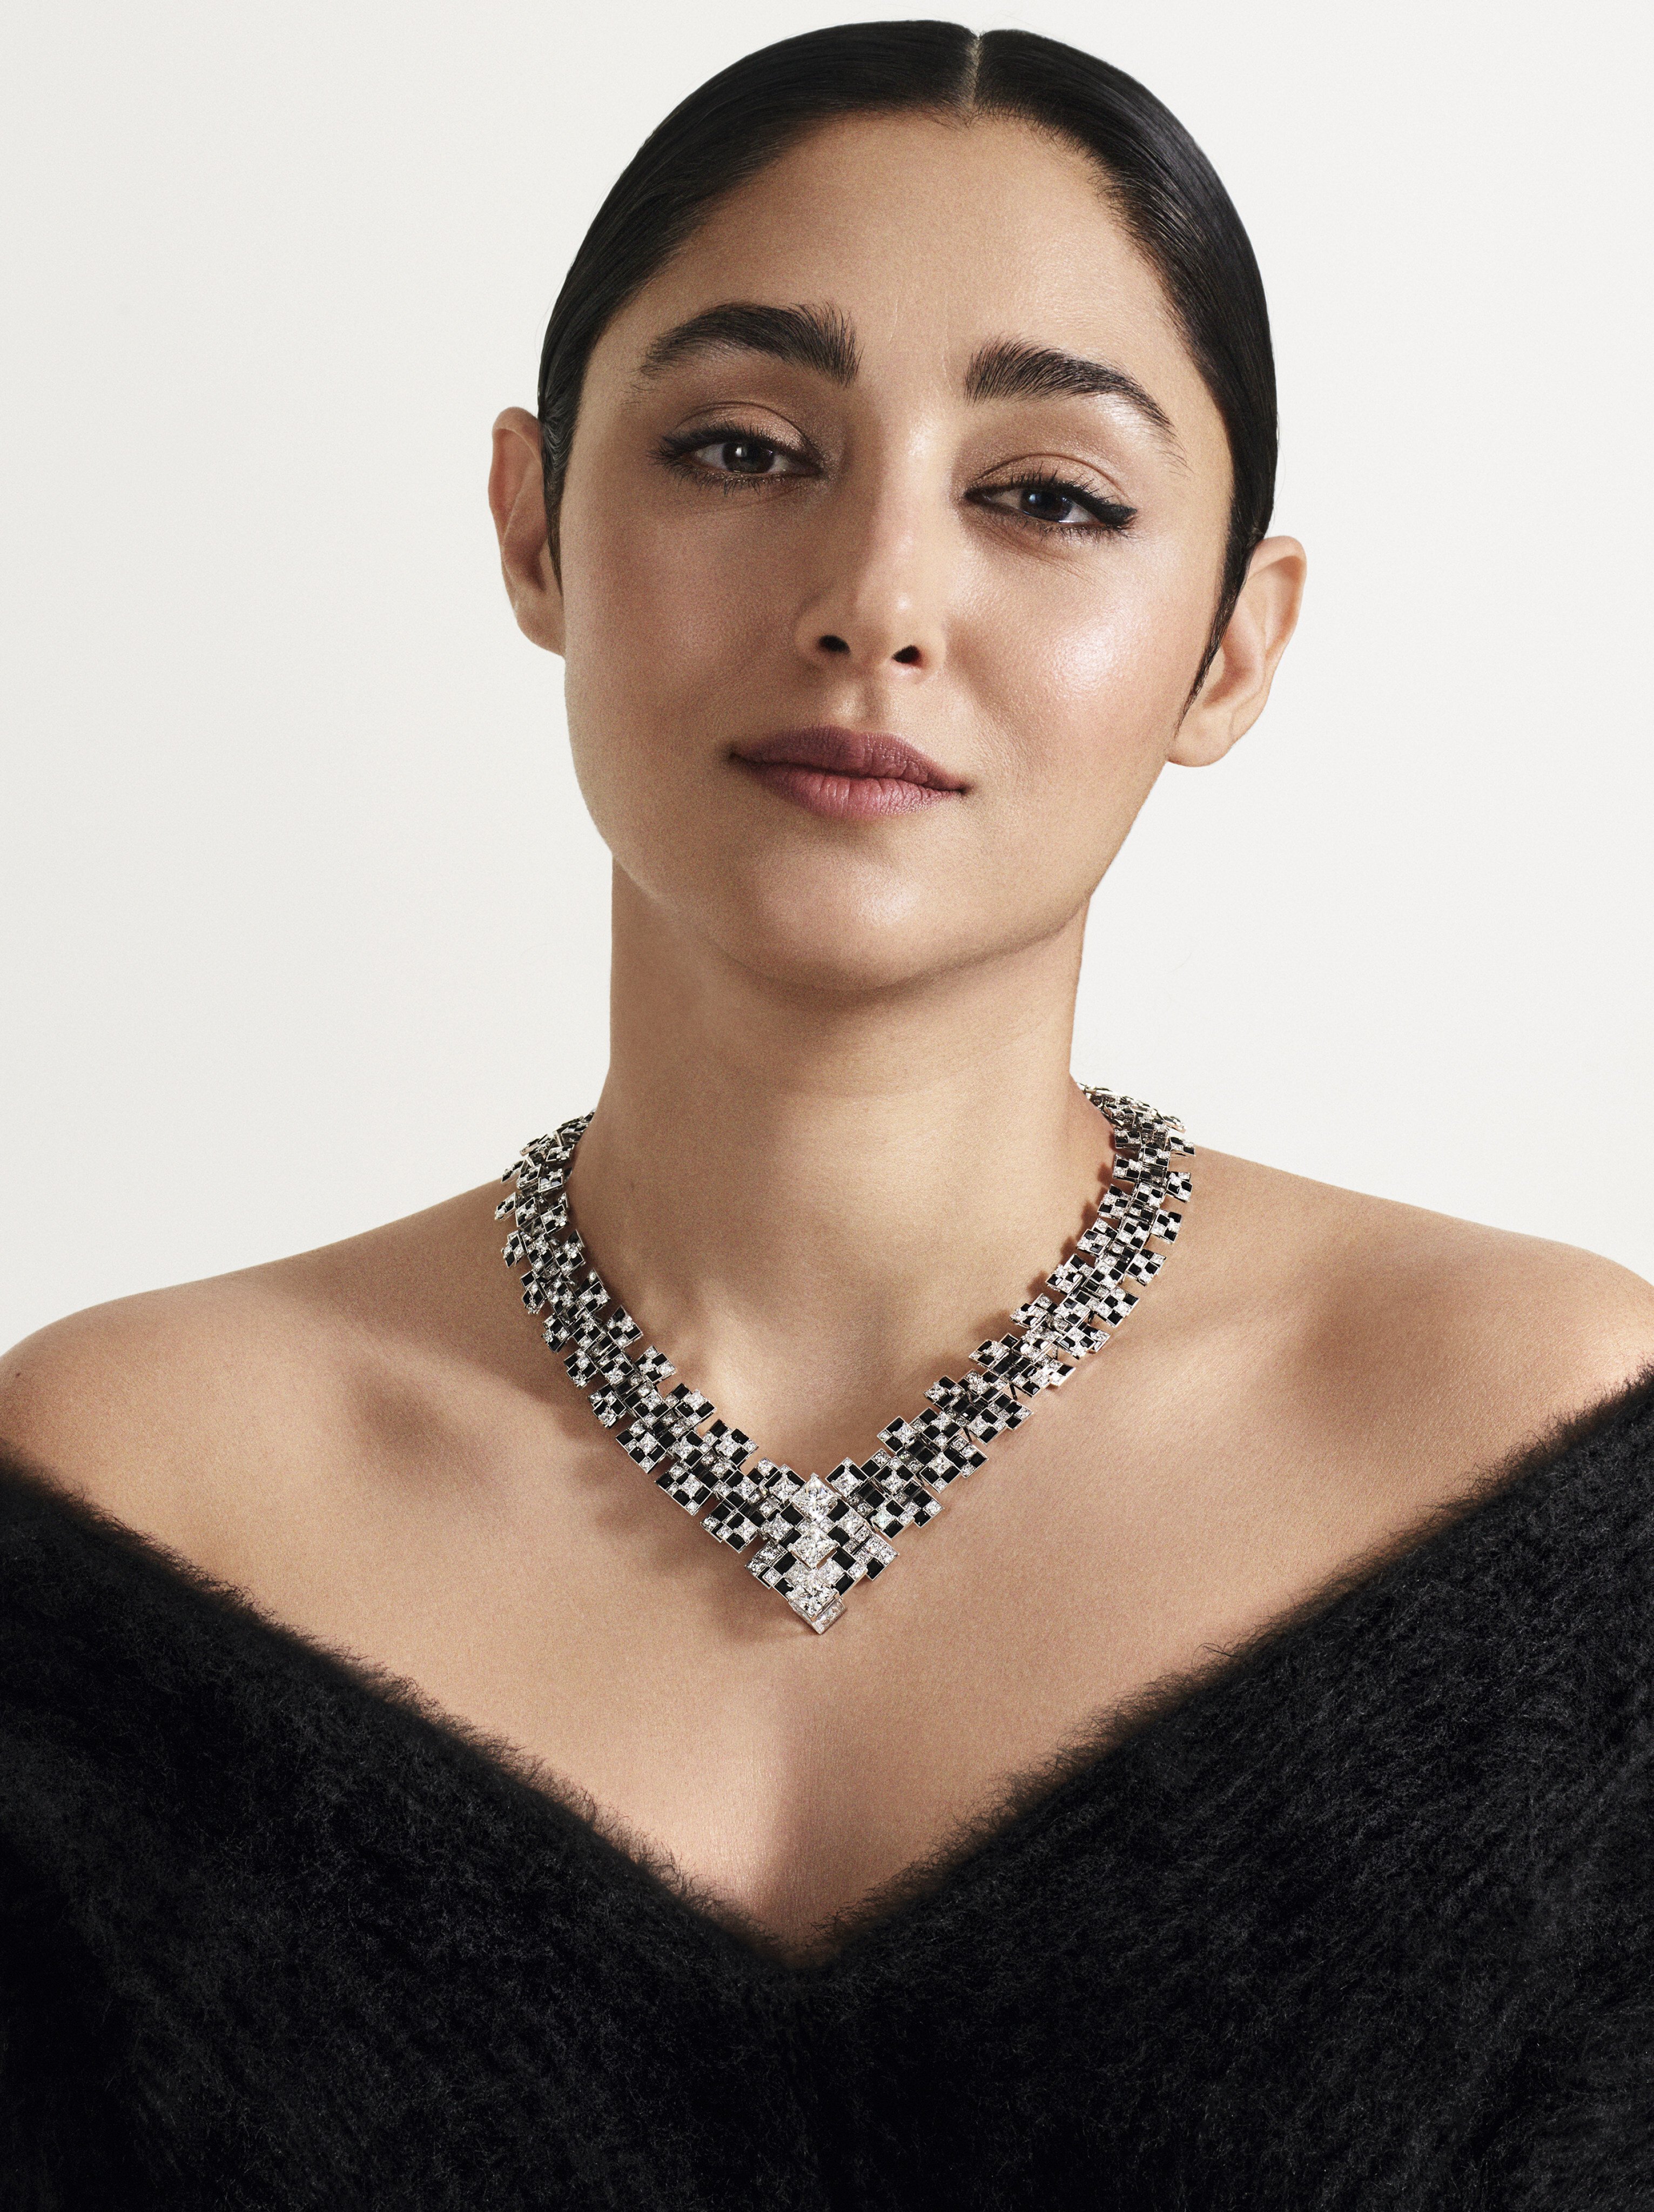 Actress, singer and musician Golshifteh Farahani wearing Cartier’s Meride necklace. 